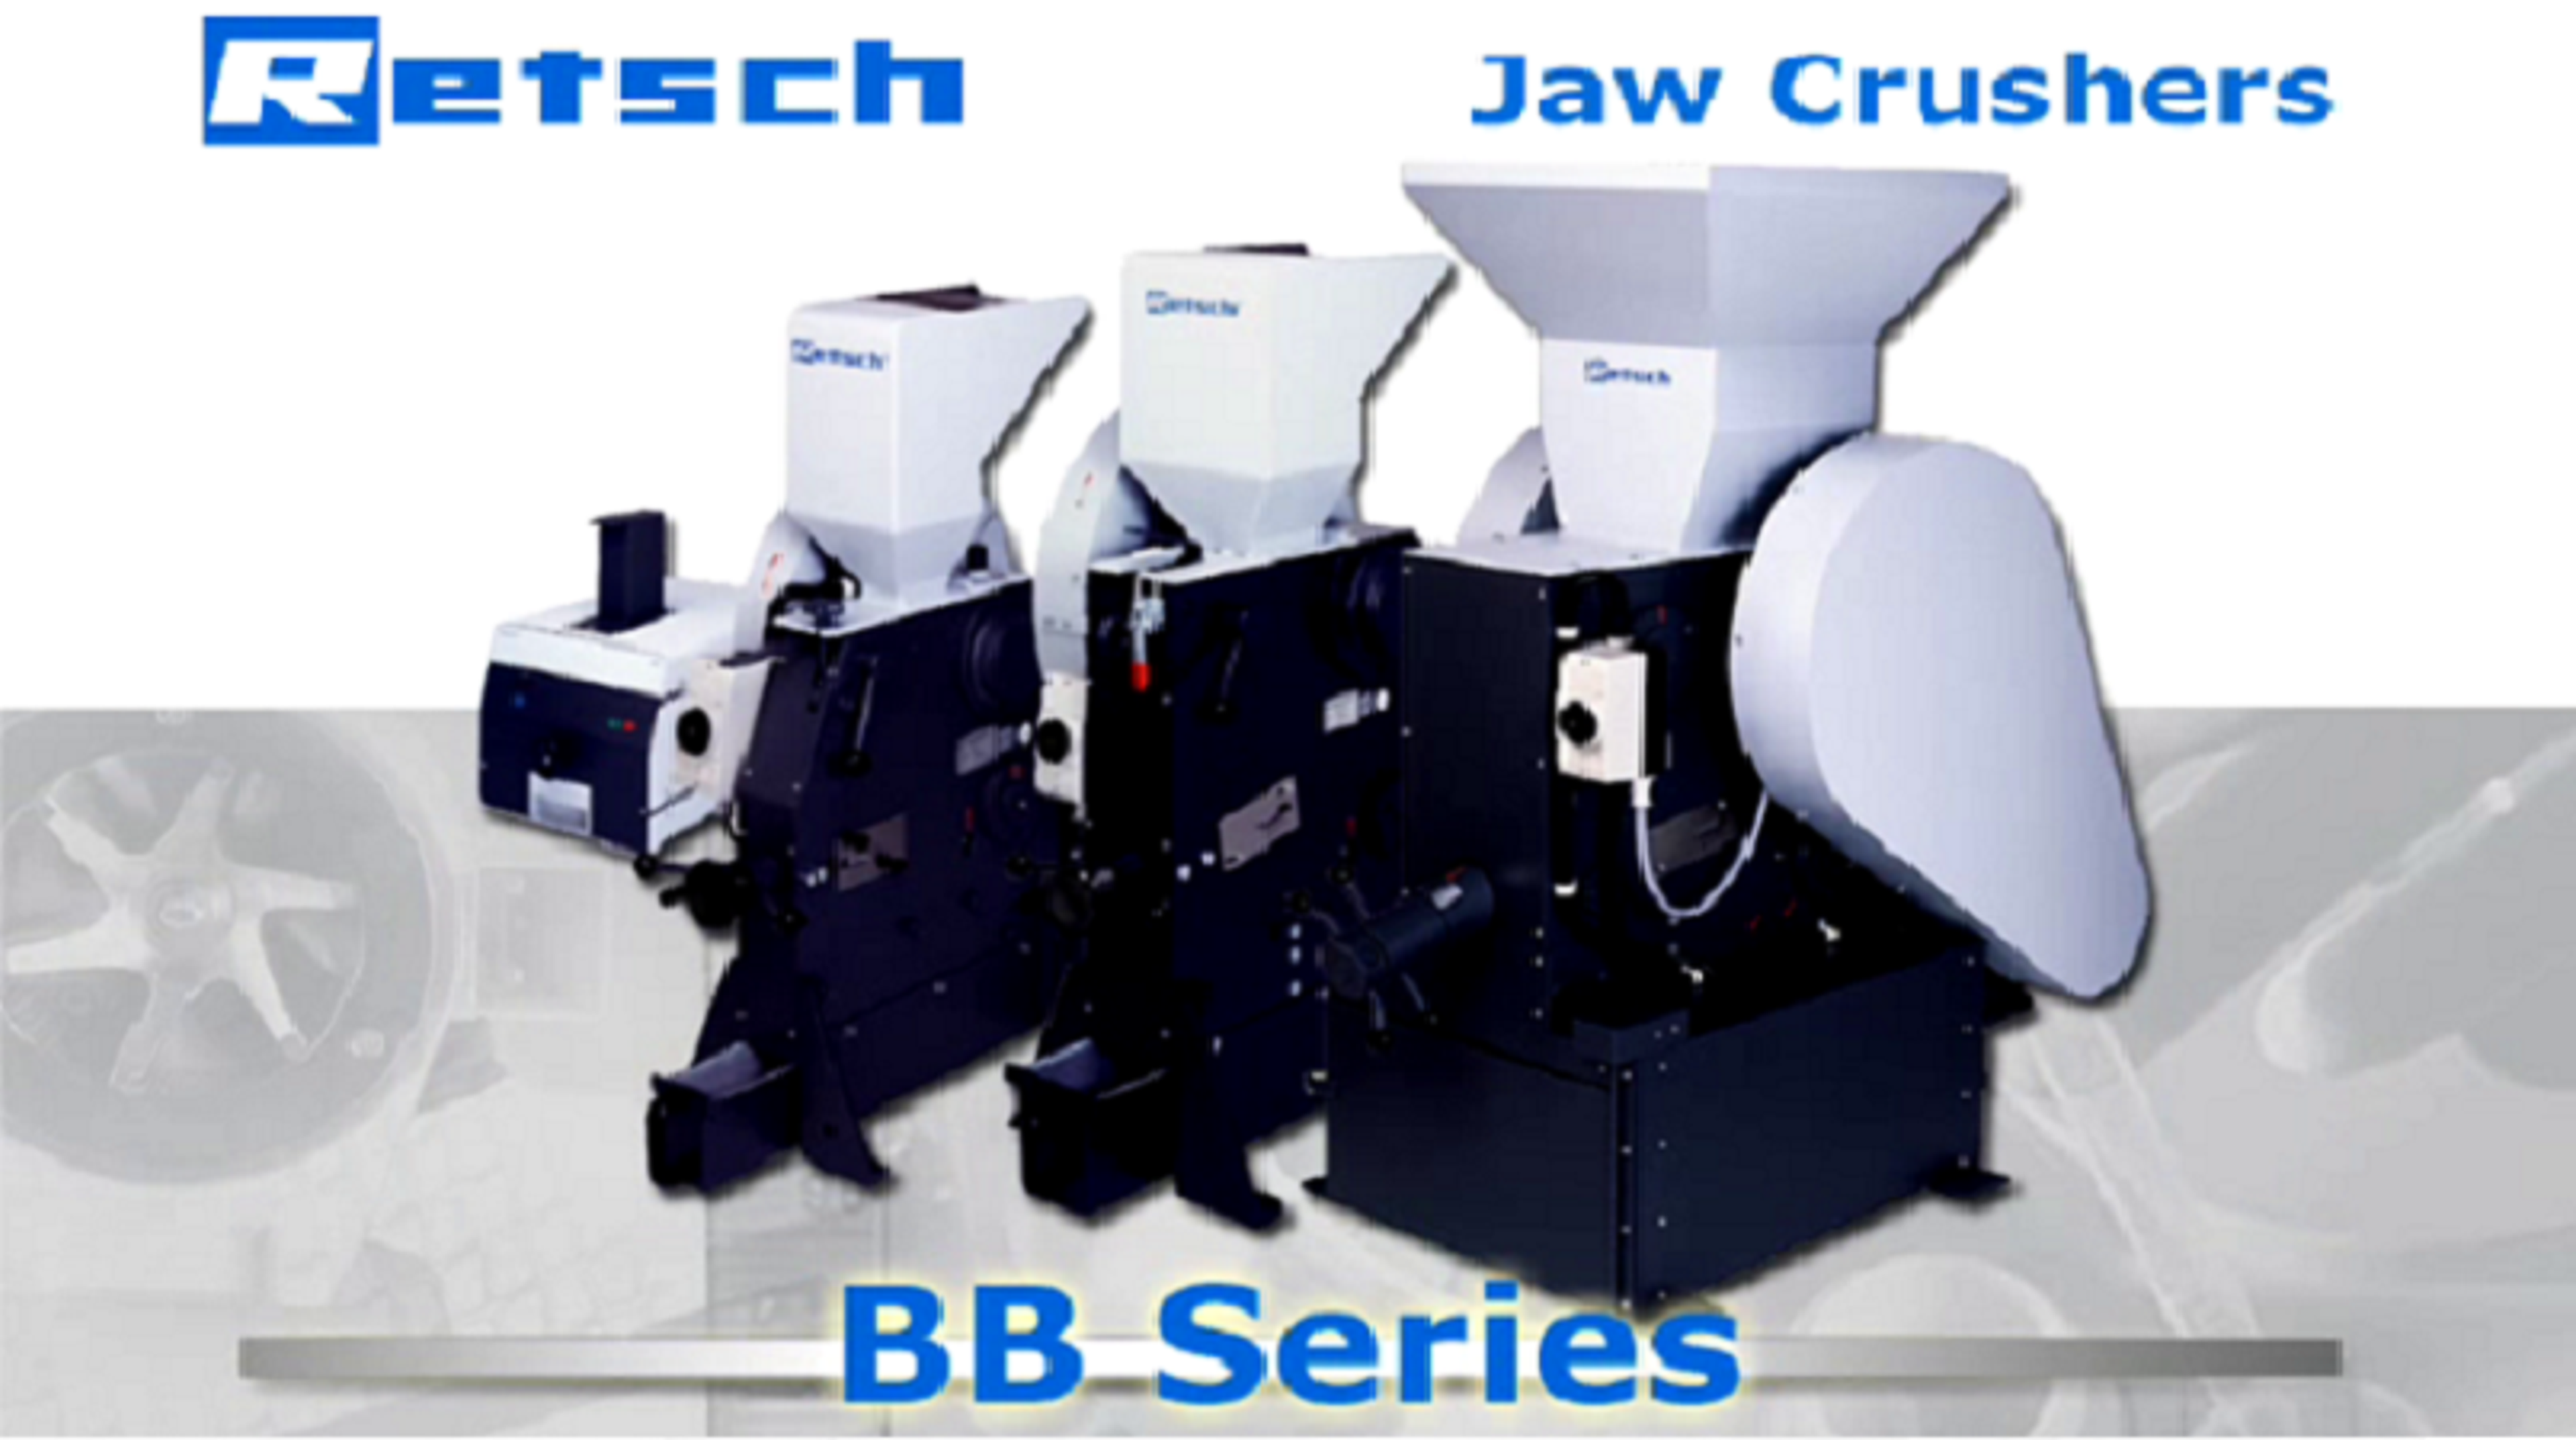 RETSCH’s Jaw Crushers Provide Rapid and Powerful Milling Capabilities